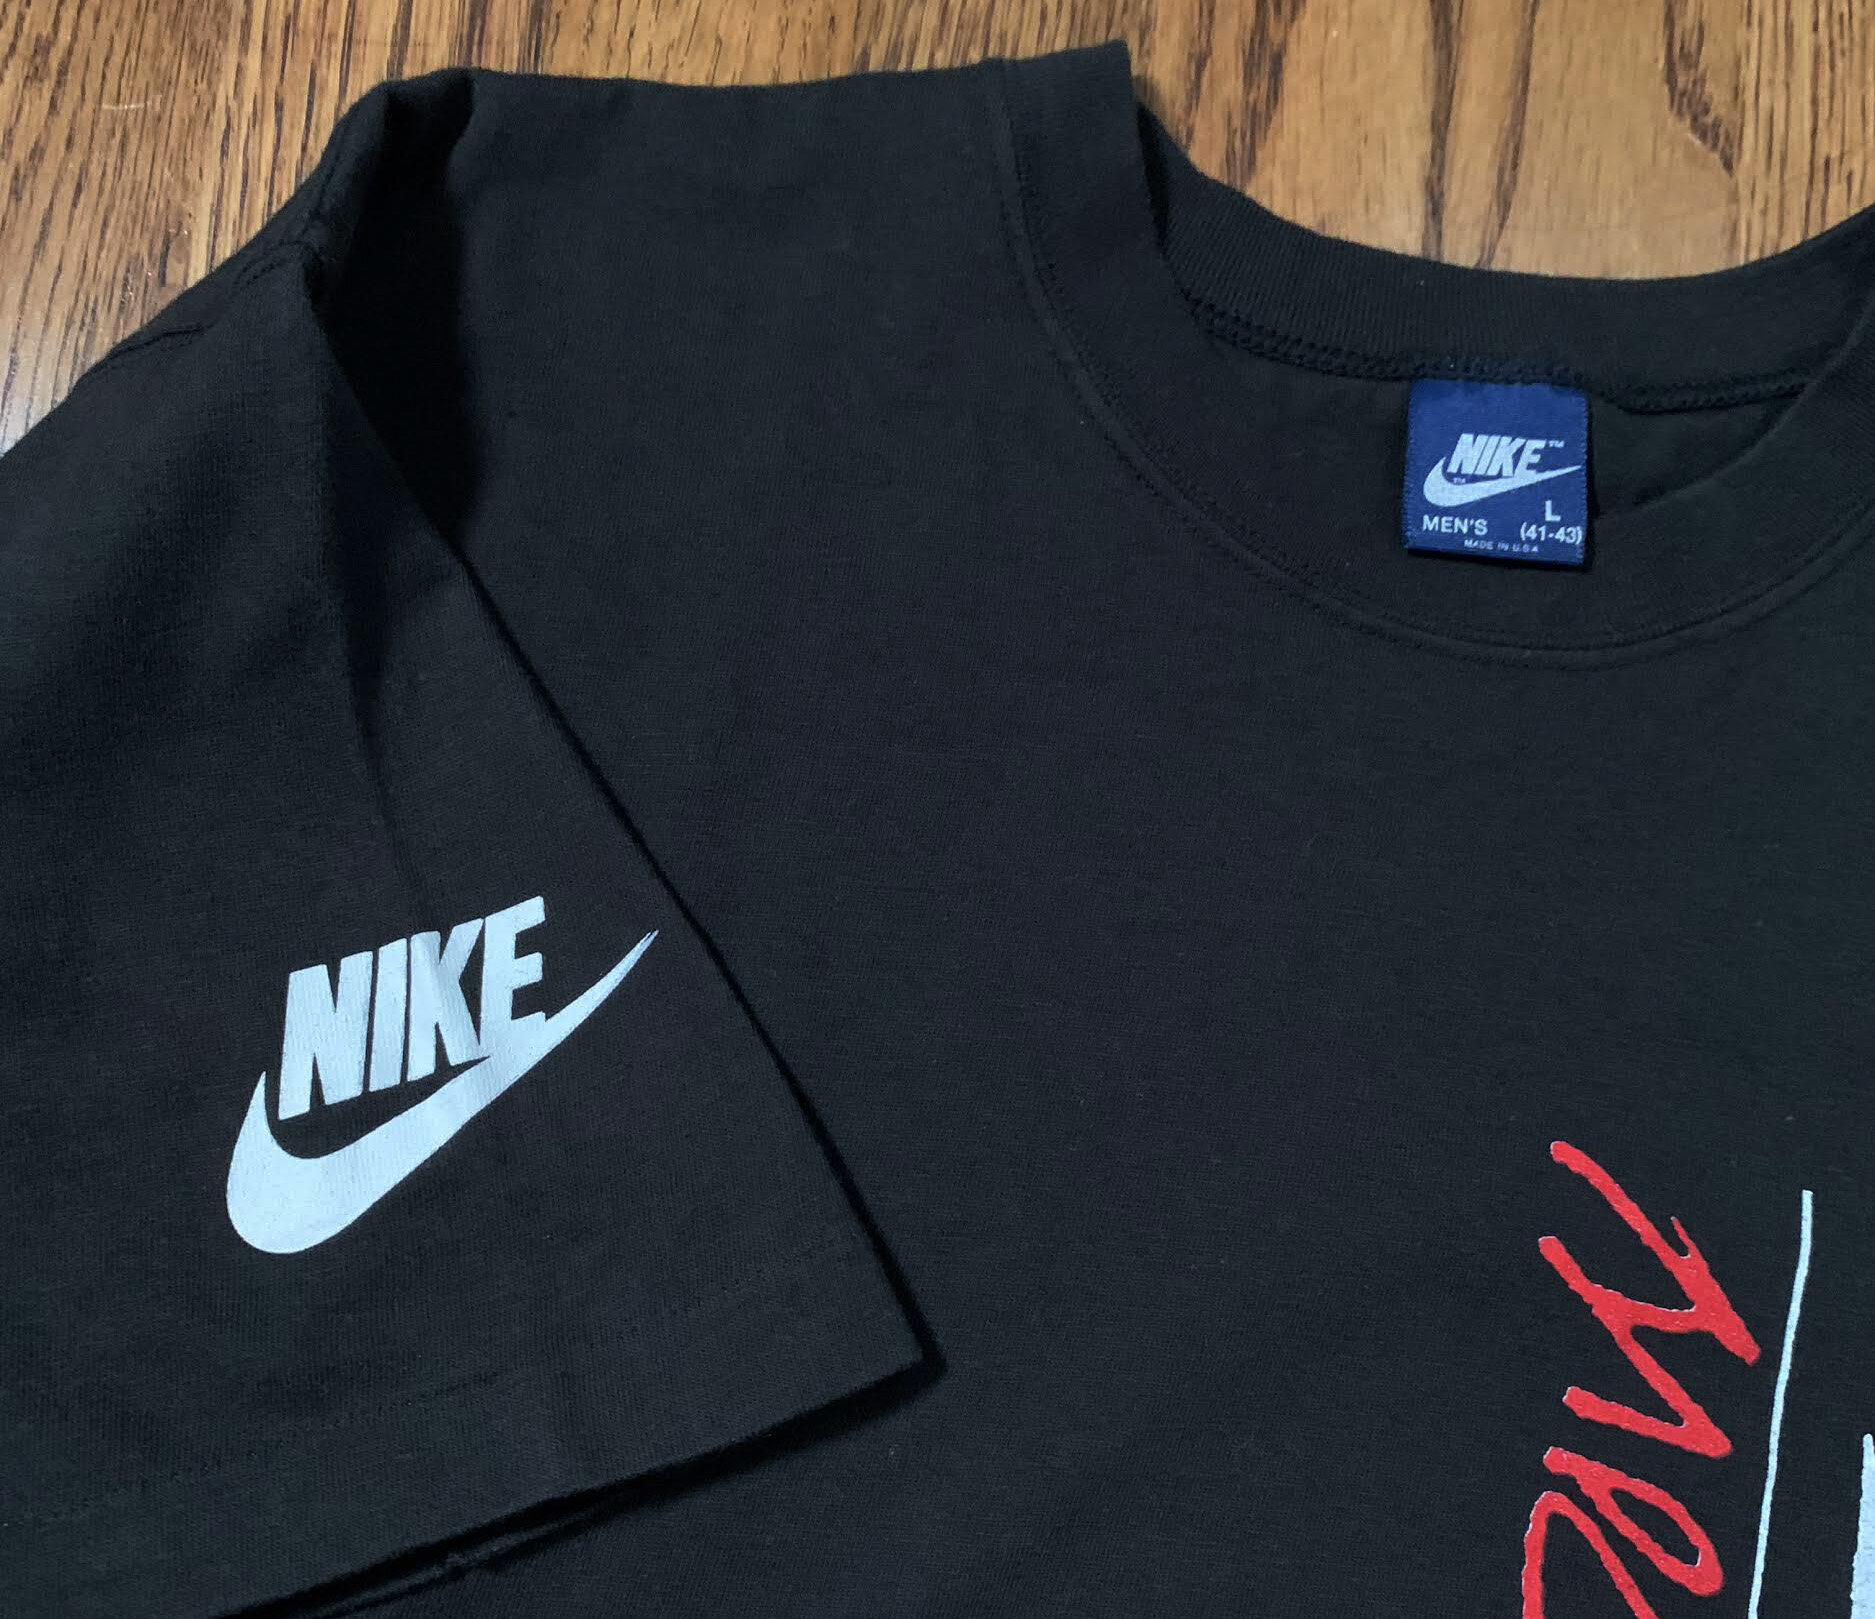 NIKE 80s Made in USA vintage Tee